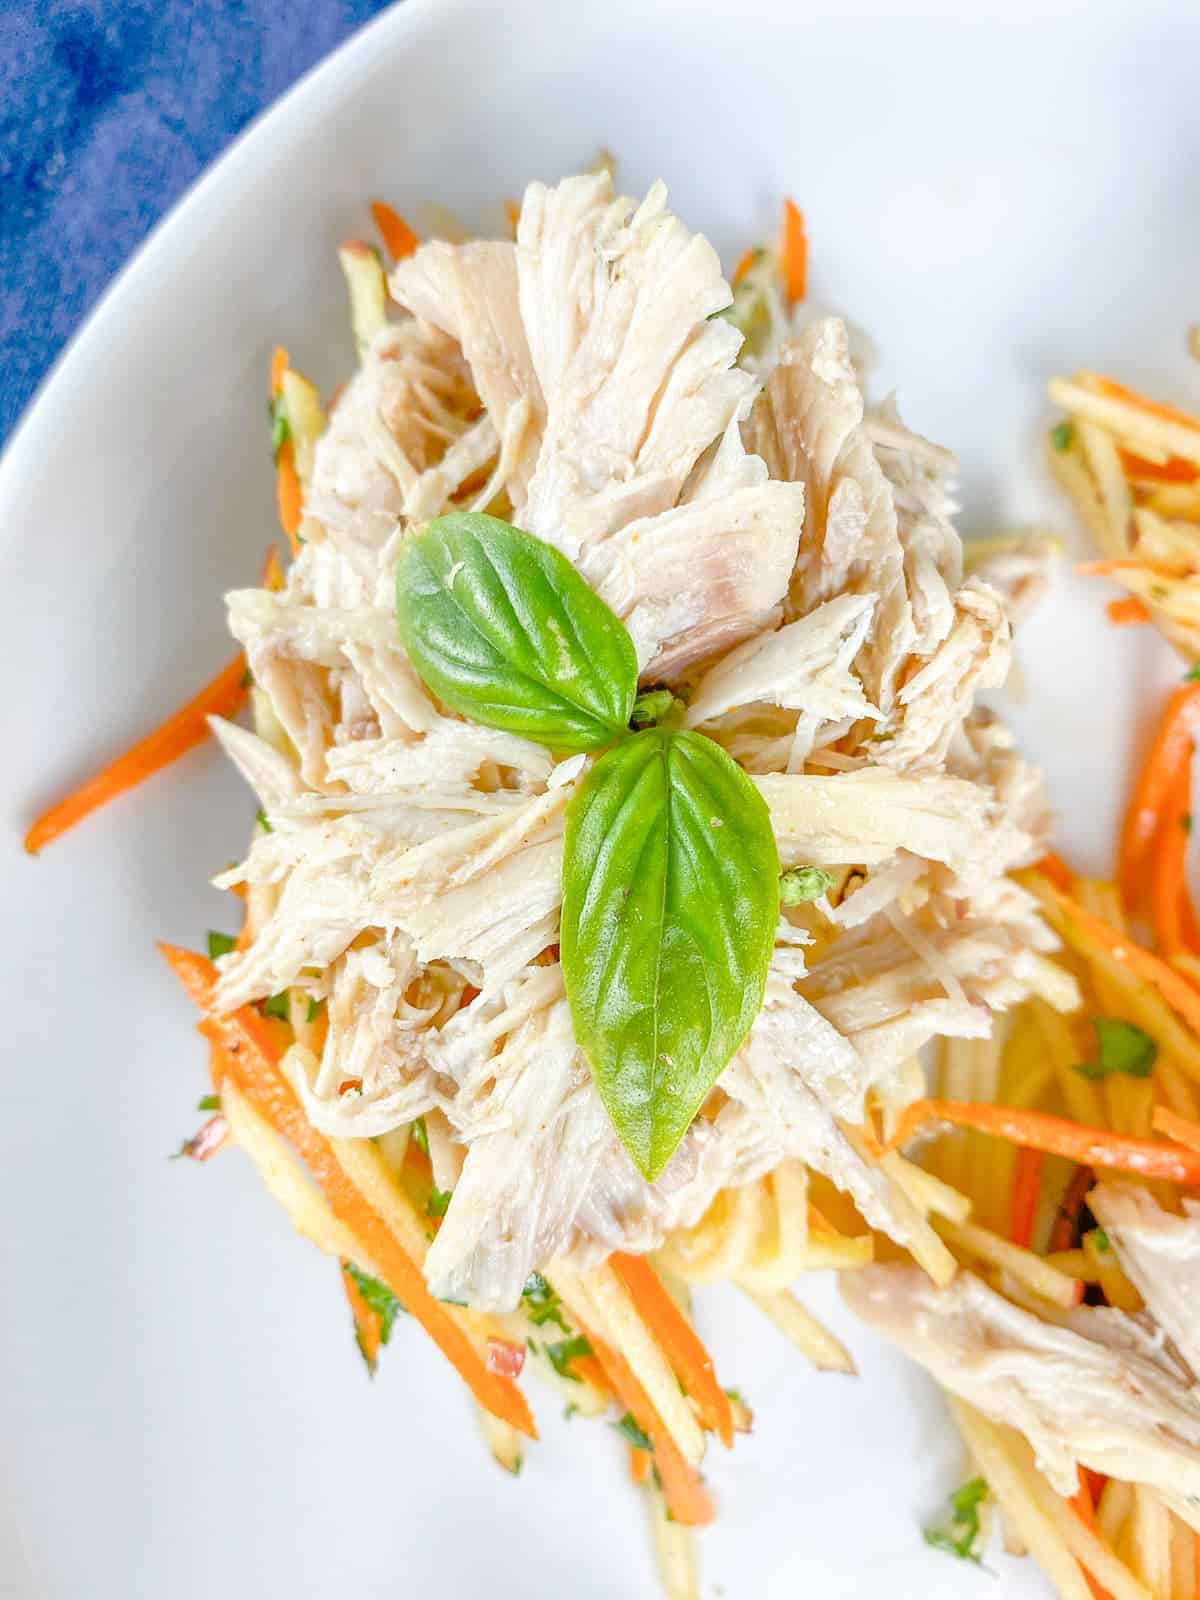 shredded chicken stacks with sweet potatoes and apple slaw